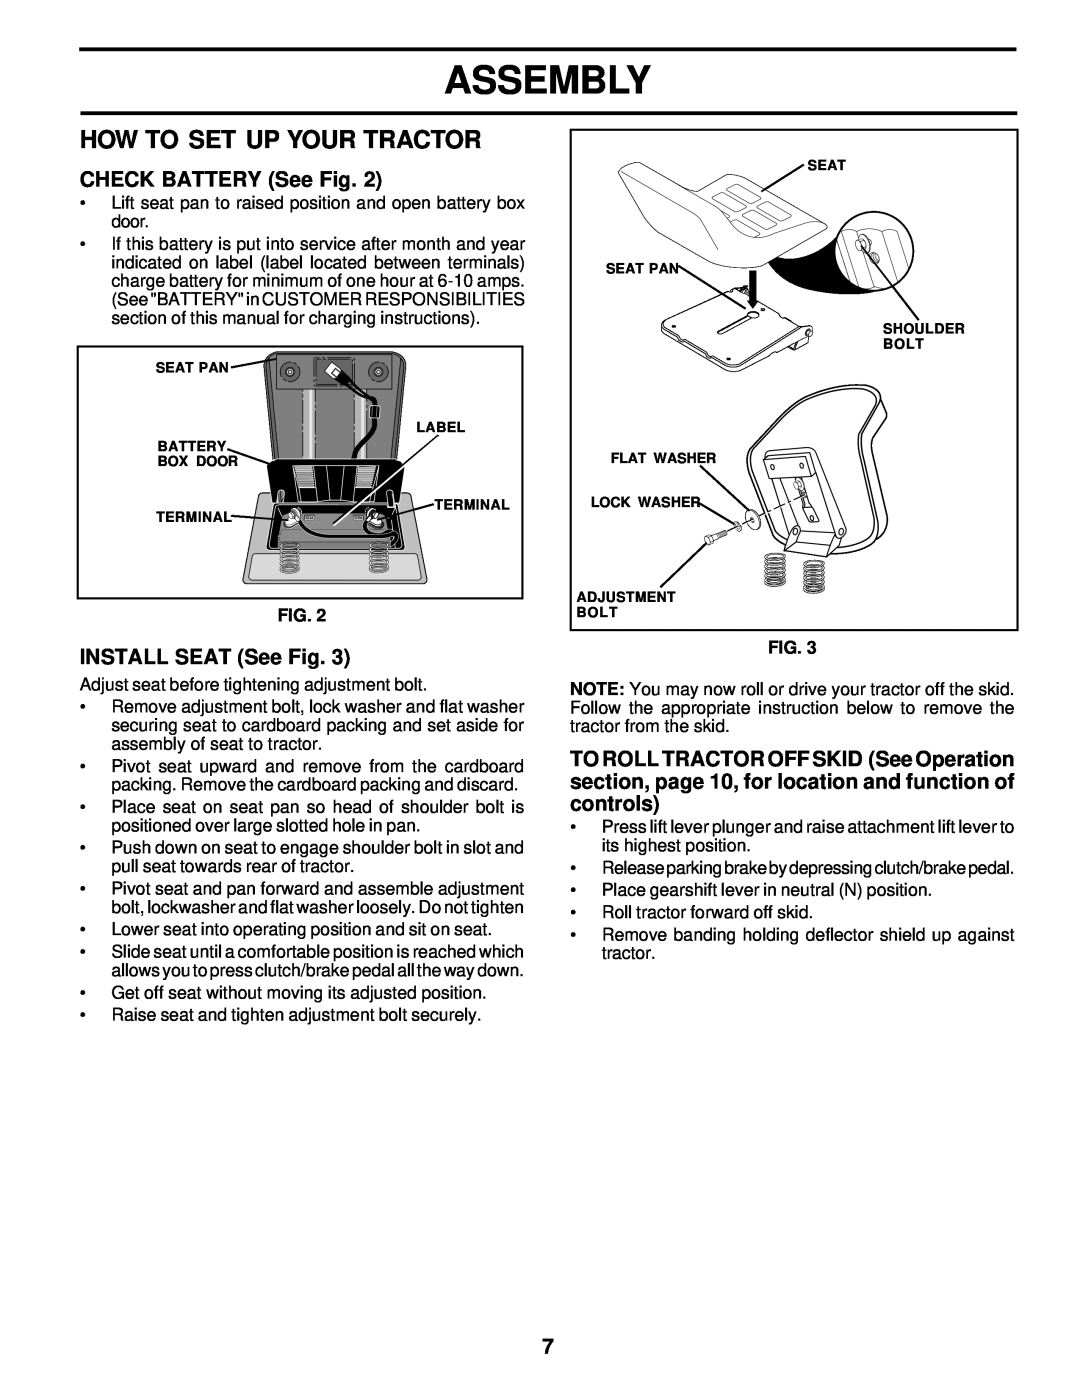 Weed Eater 177677 owner manual How To Set Up Your Tractor, CHECK BATTERY See Fig, INSTALL SEAT See Fig, Assembly 